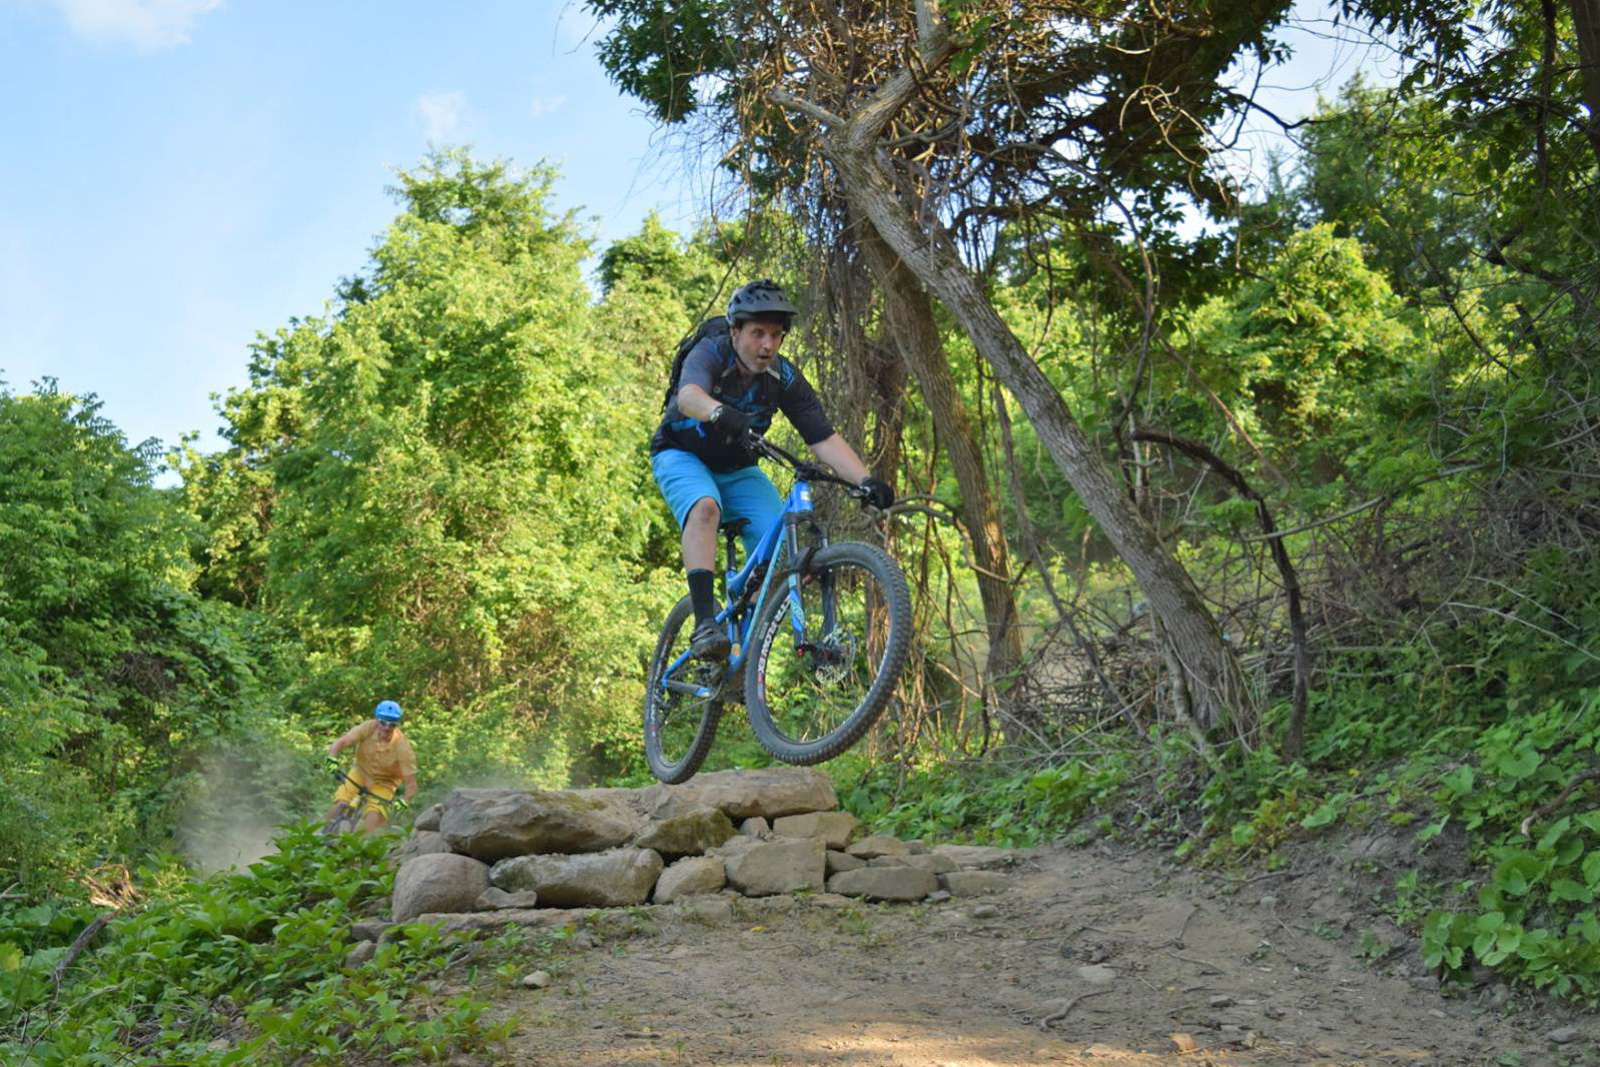 Riders on the Mountain Bike Trail at Chestnut Ridge during COMBO event.